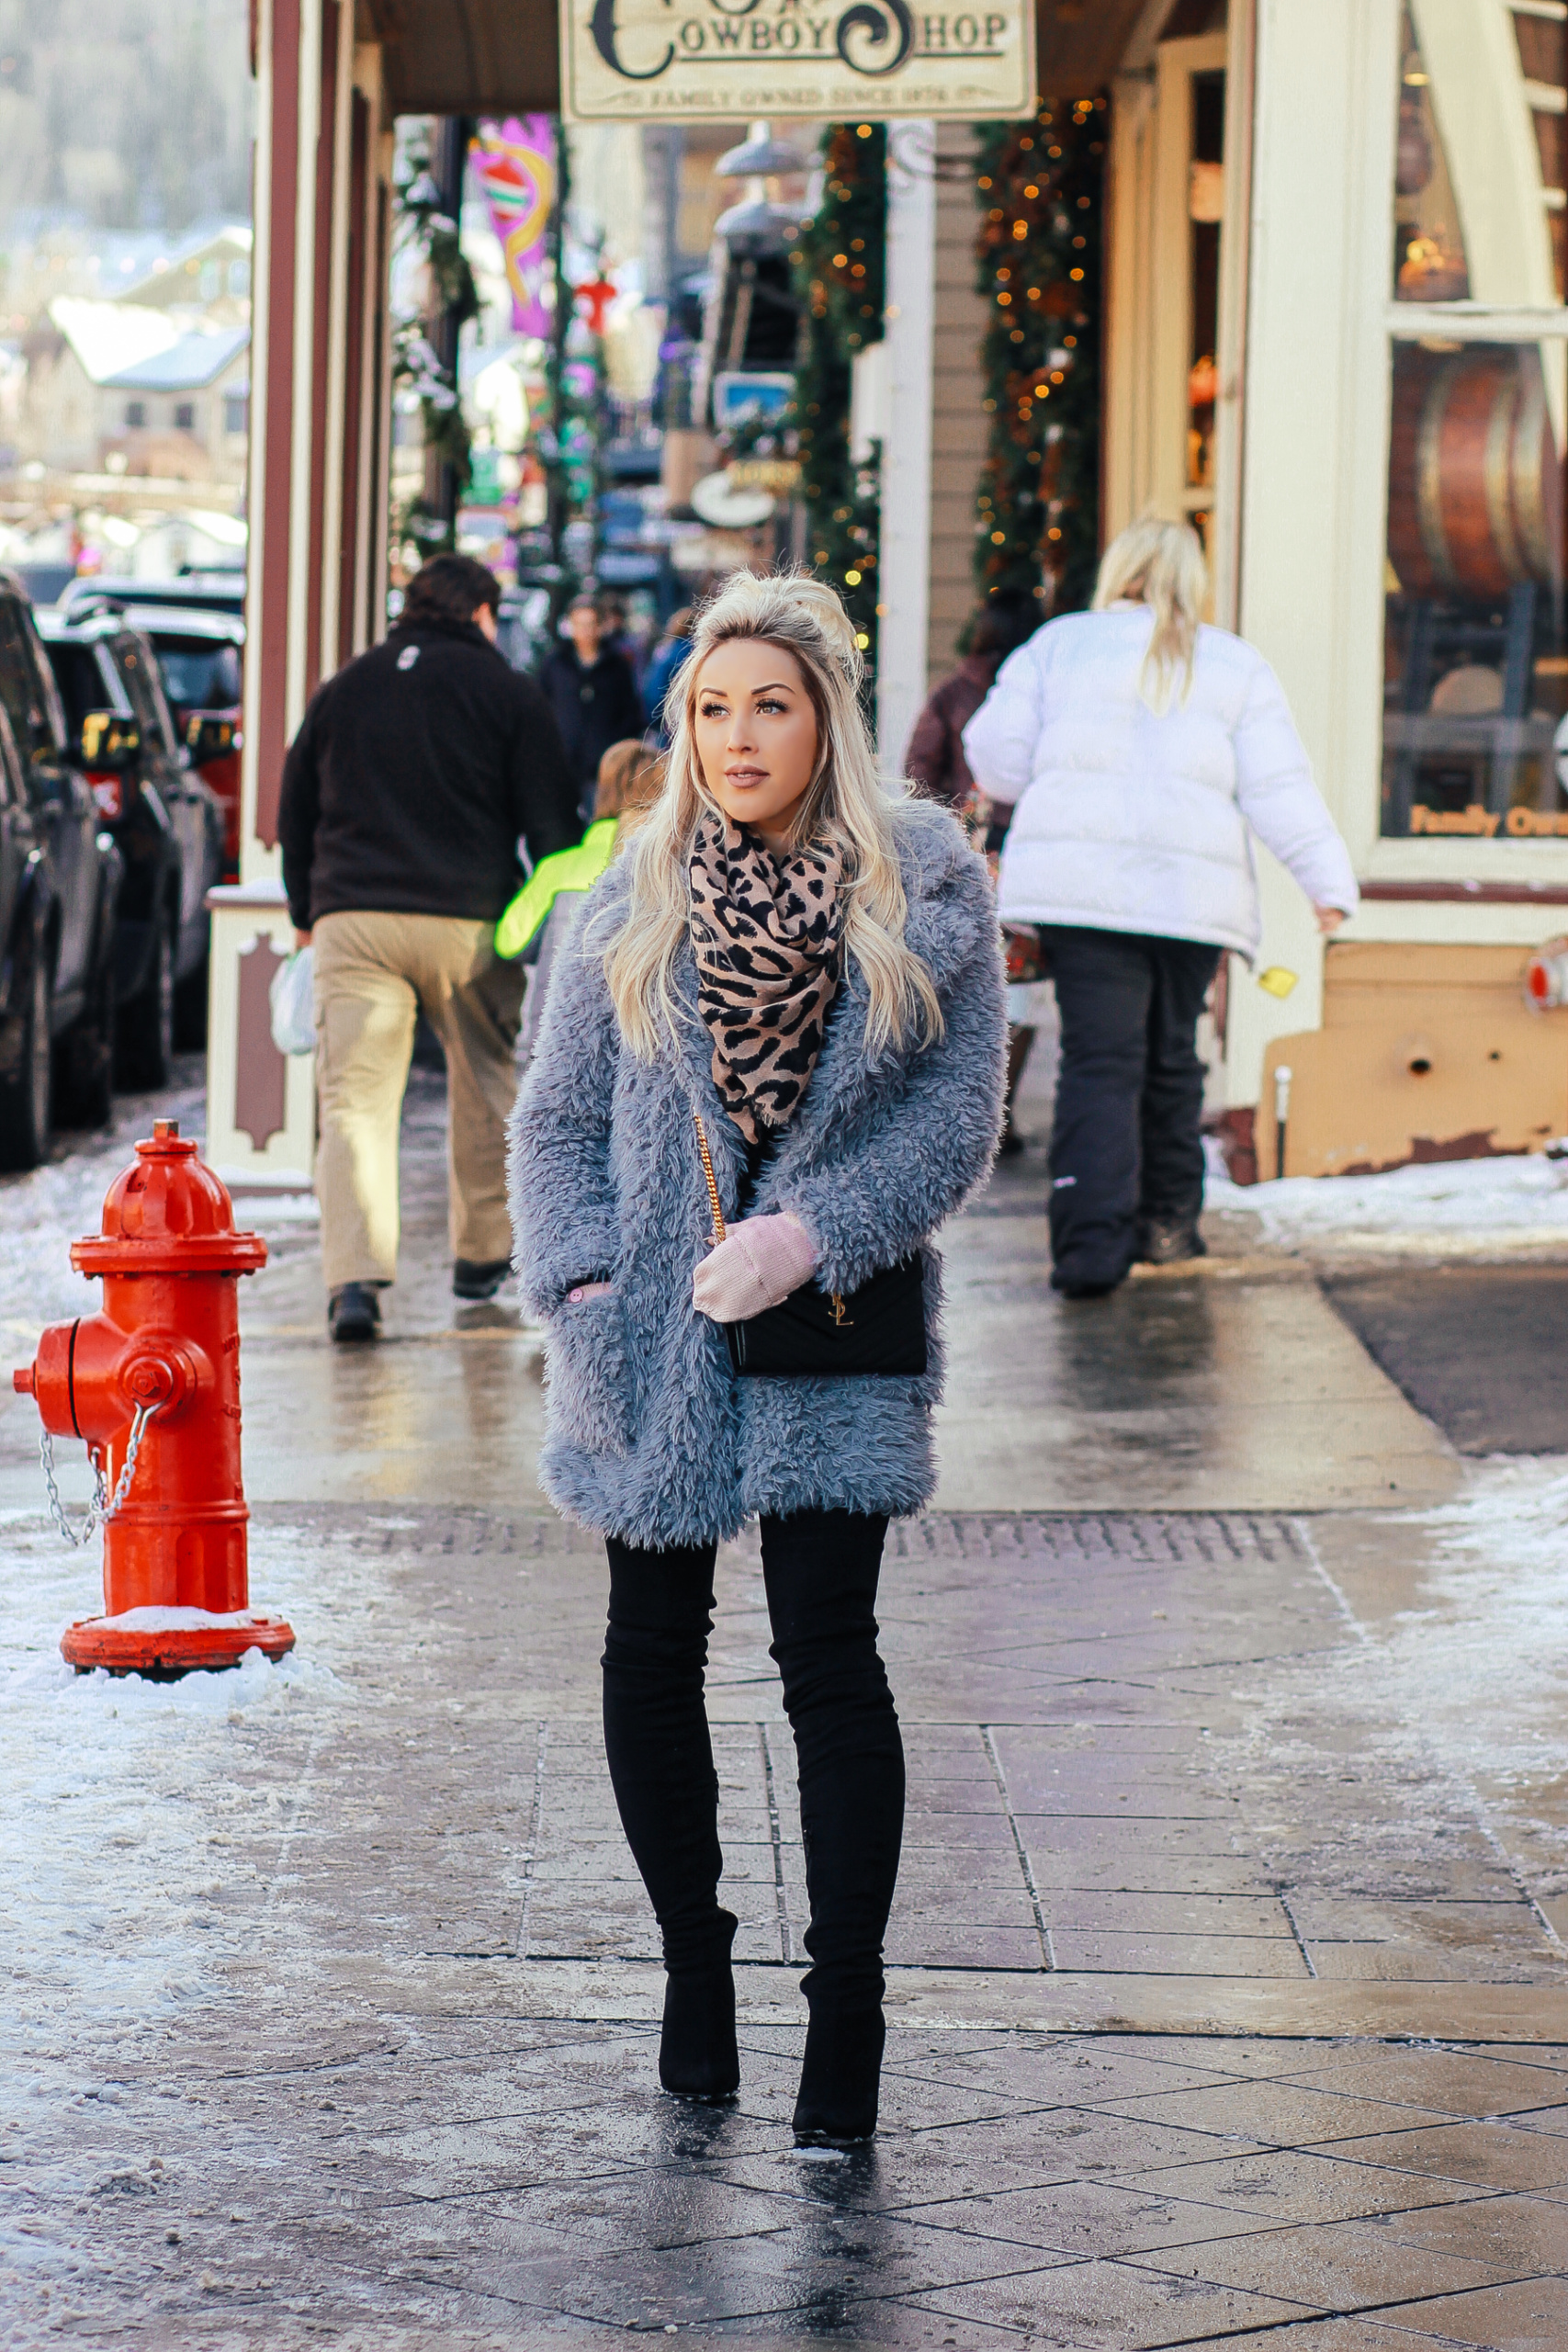 Blondie in the City | Blue Faux Fur Winter Coat, Leopard scarf, YSL Bag, Black Thigh High Boots | Winter Fashion